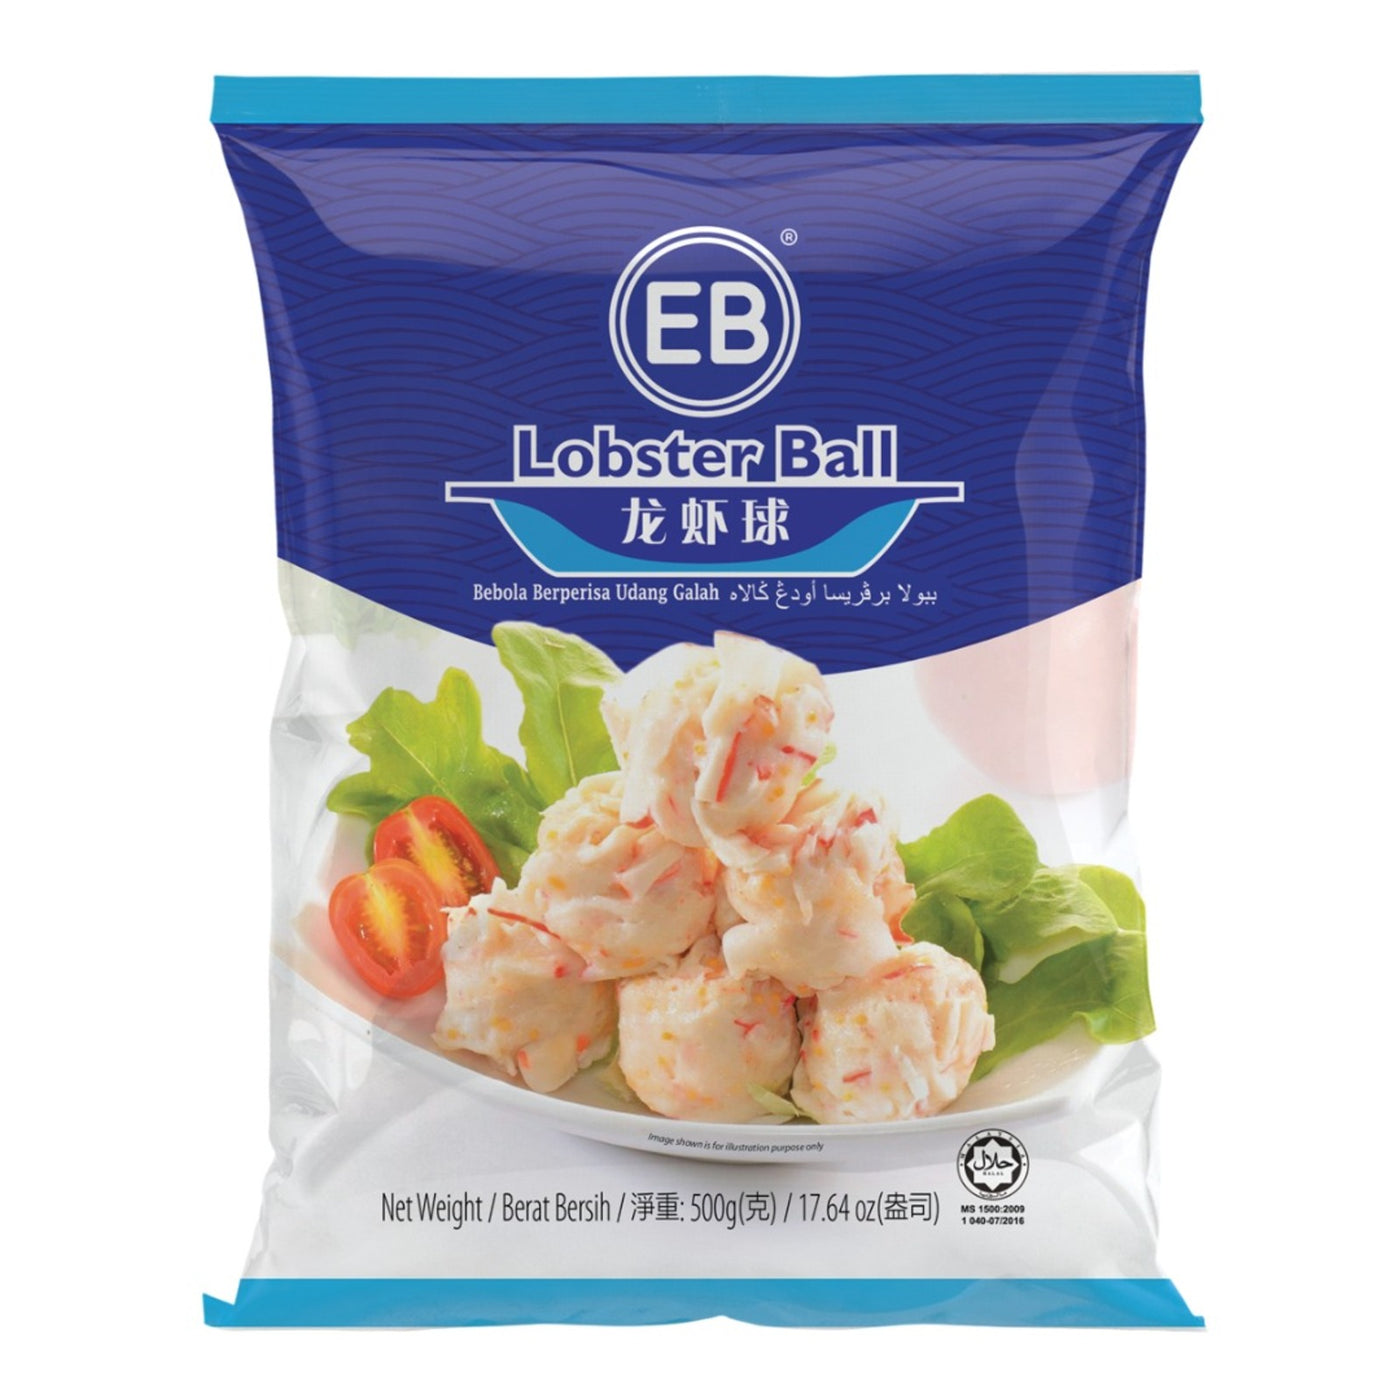 "EB" Lobster Ball 500g (Halal Certified)